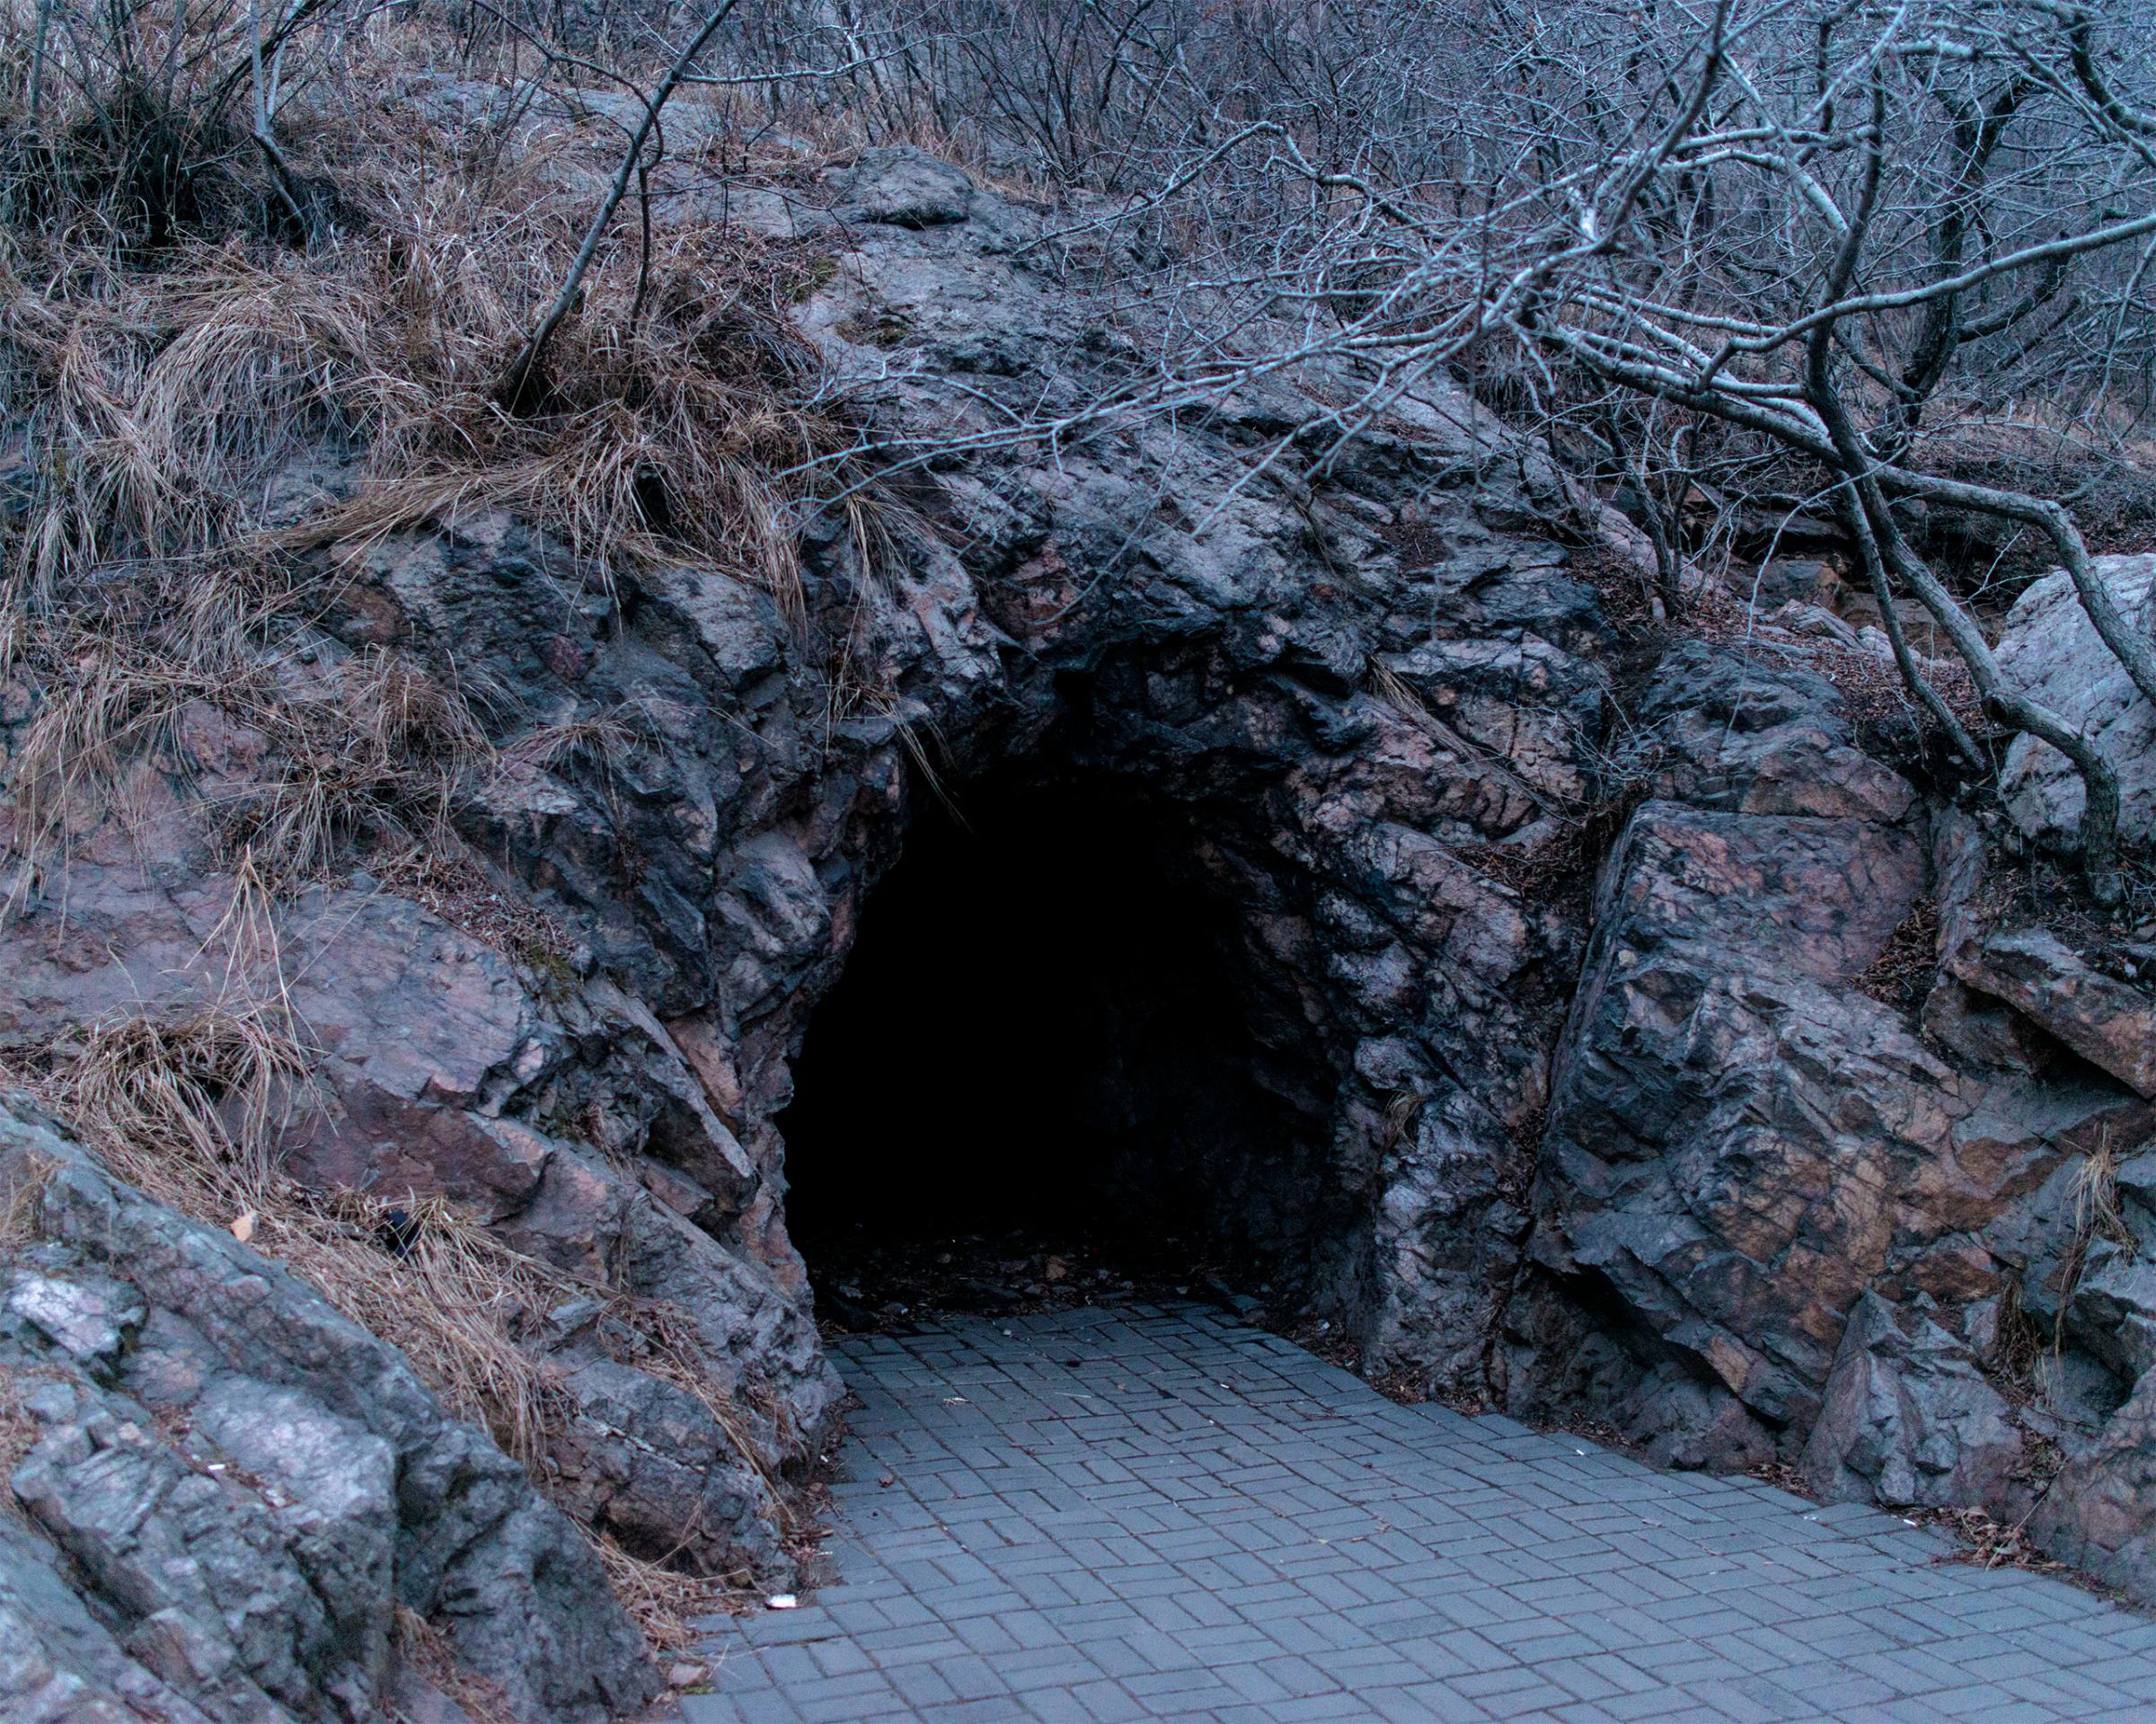 A cave near the Yalu River in the expanding city of Dandong. Caves are used by defectors fleeing from North Korea to hide.